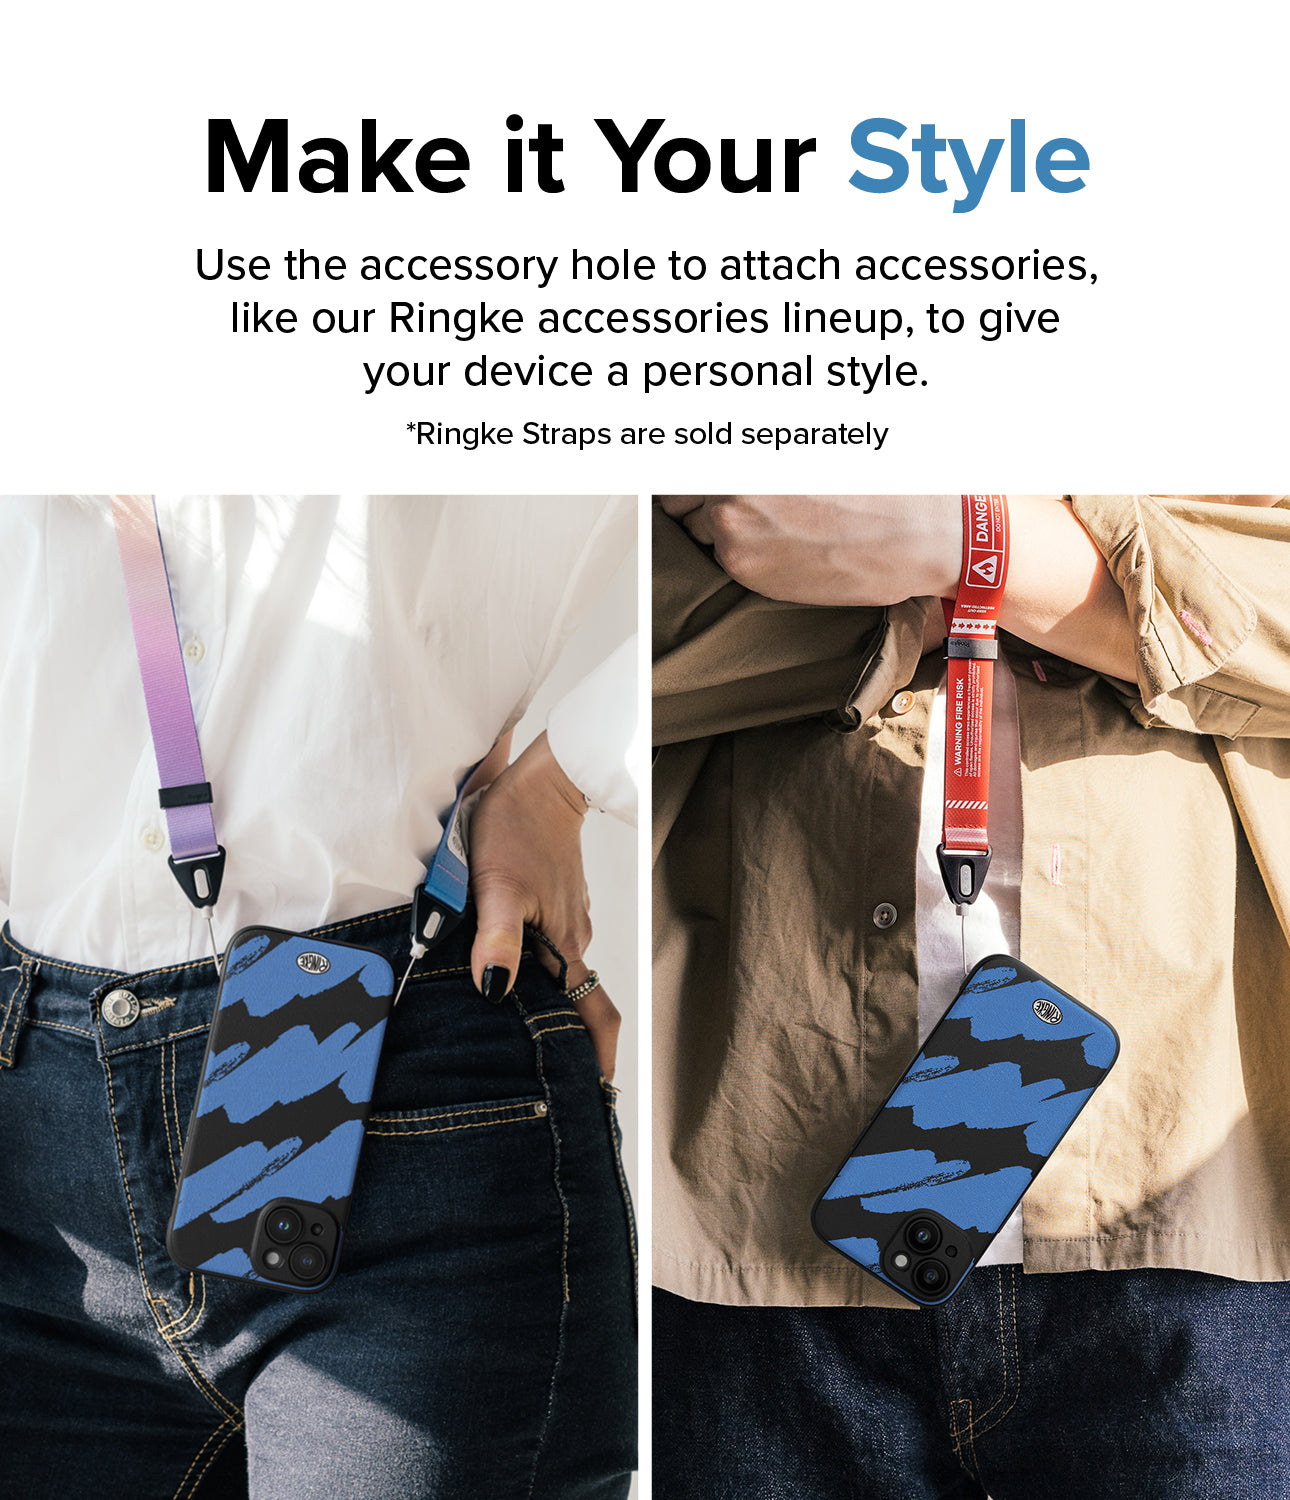 iPhone 15 Case | Onyx Design - Blue Brush - Make it Your Style. Use the accessory hole to attach accessories, like our Ringke accessories lineup, to give your device a personal style.